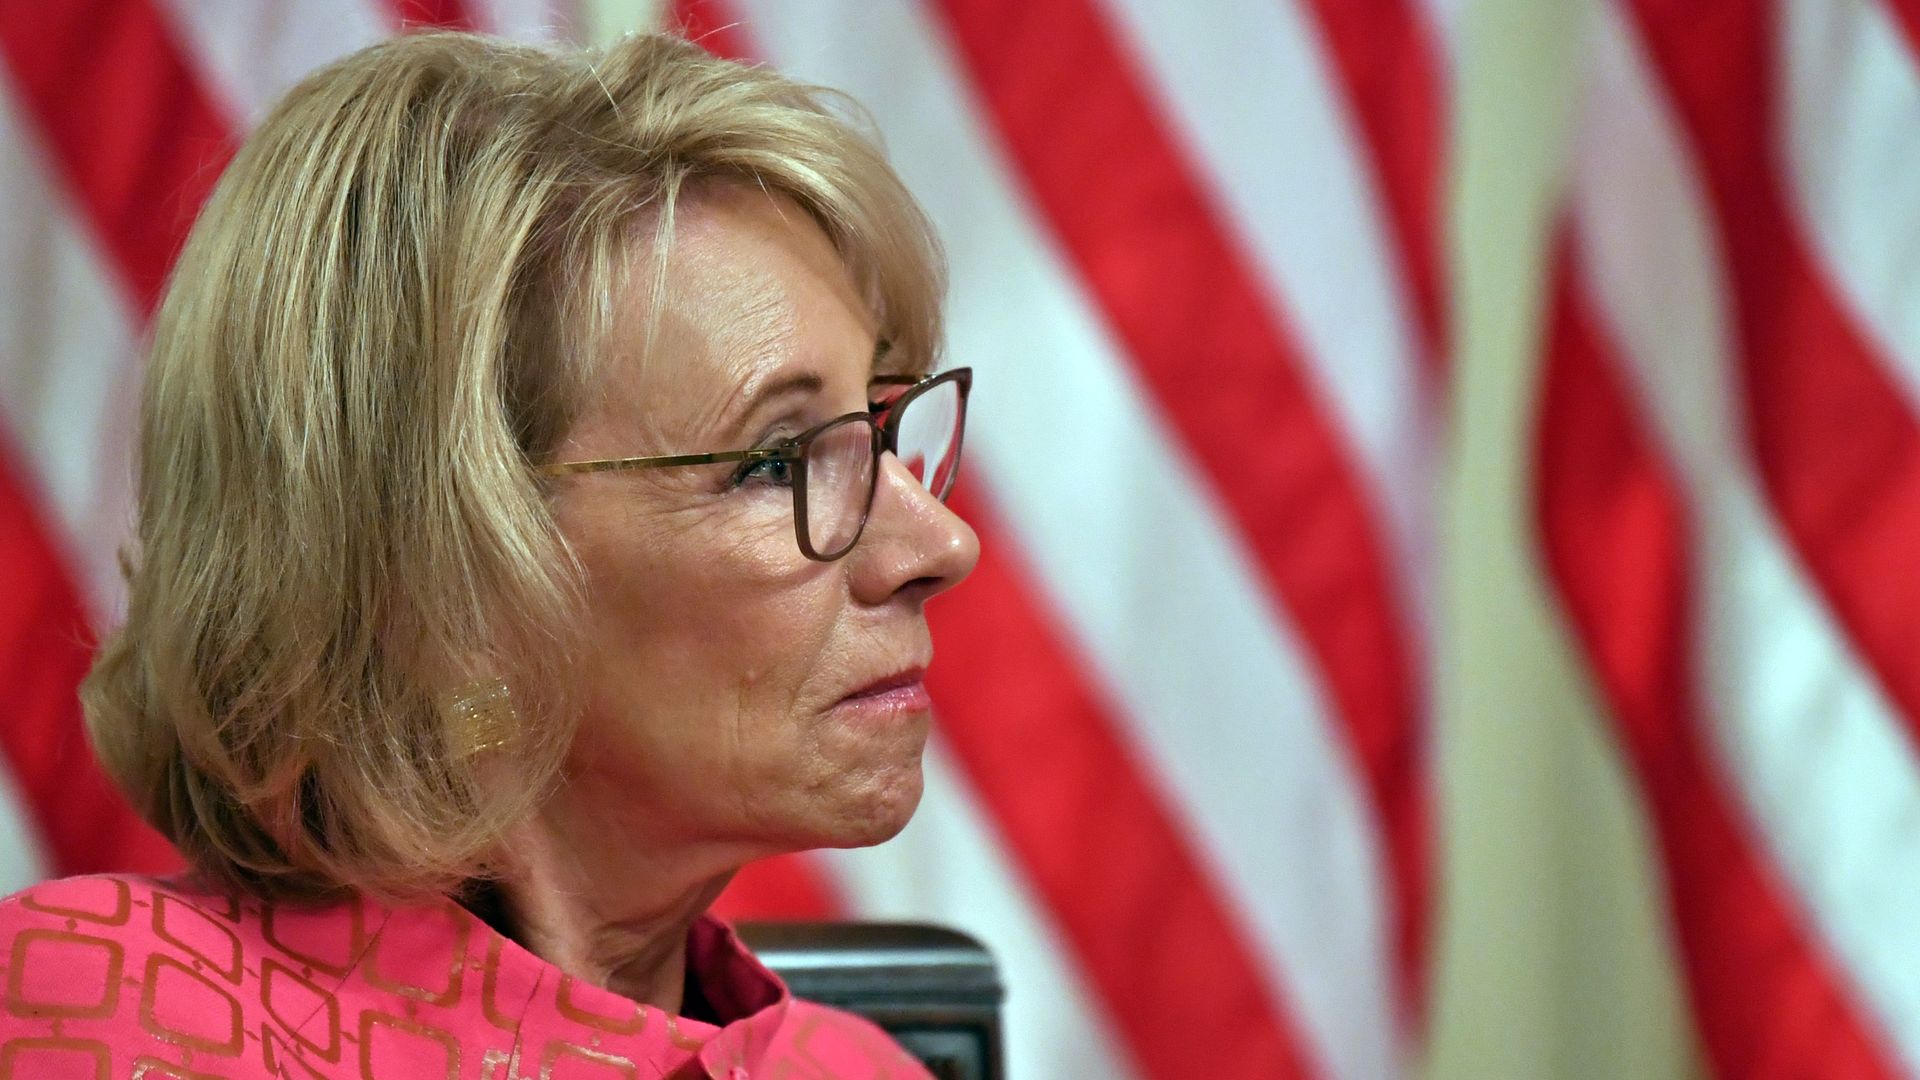 U.S. Secretary of Education Betsy DeVos in the White House in August 2020.